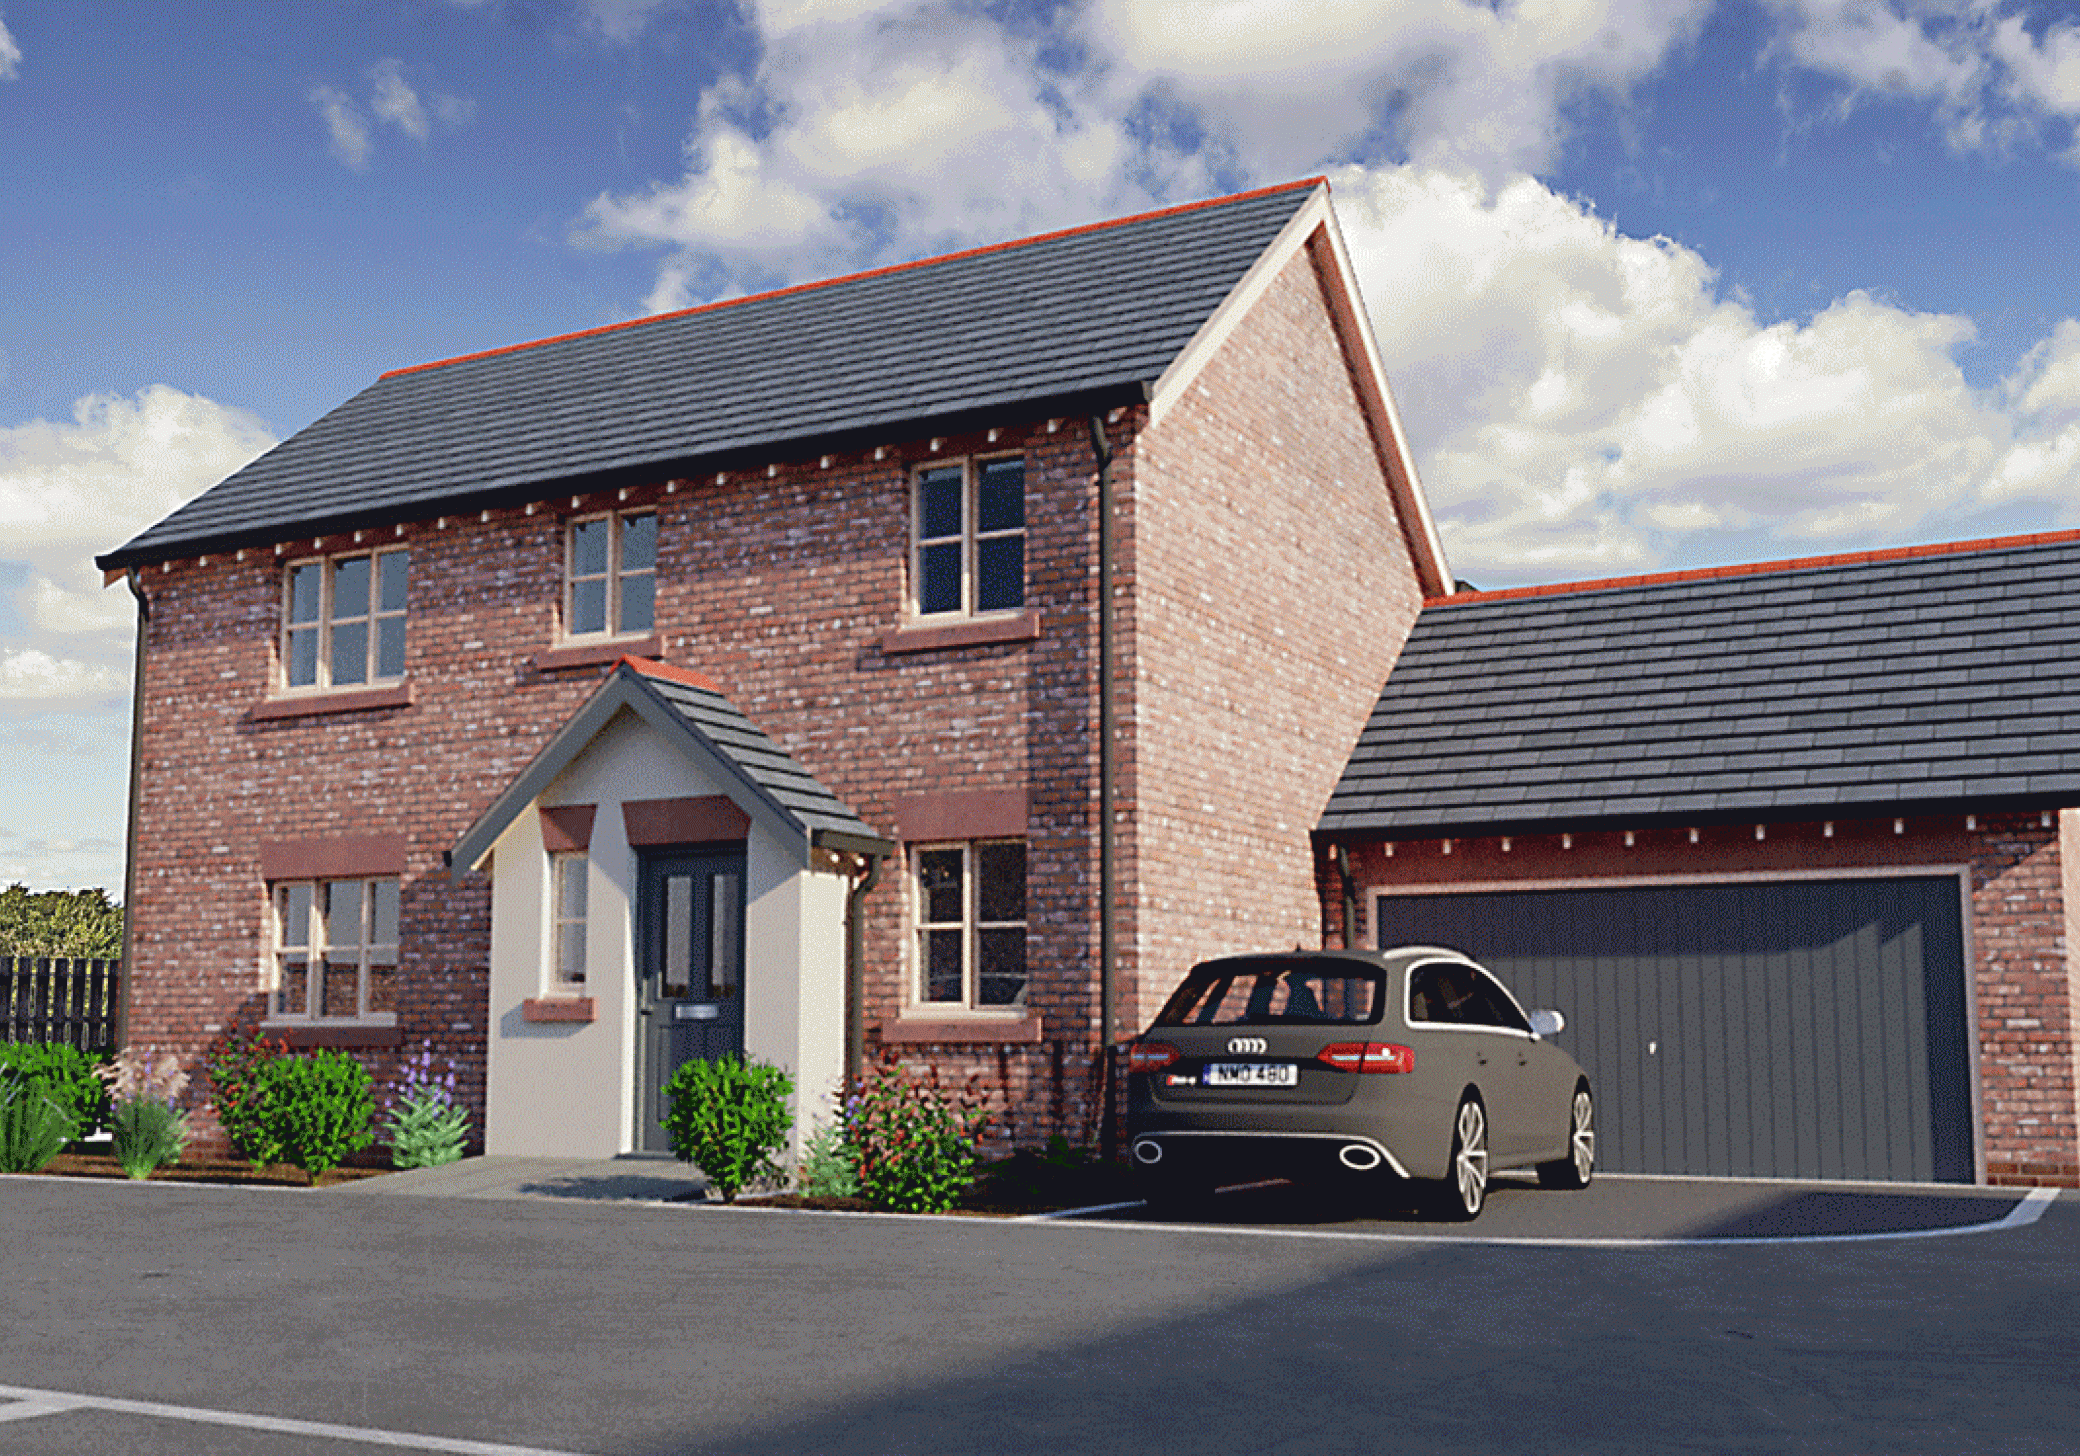 New Houses at Davenport Place, Calverley, Cheshire